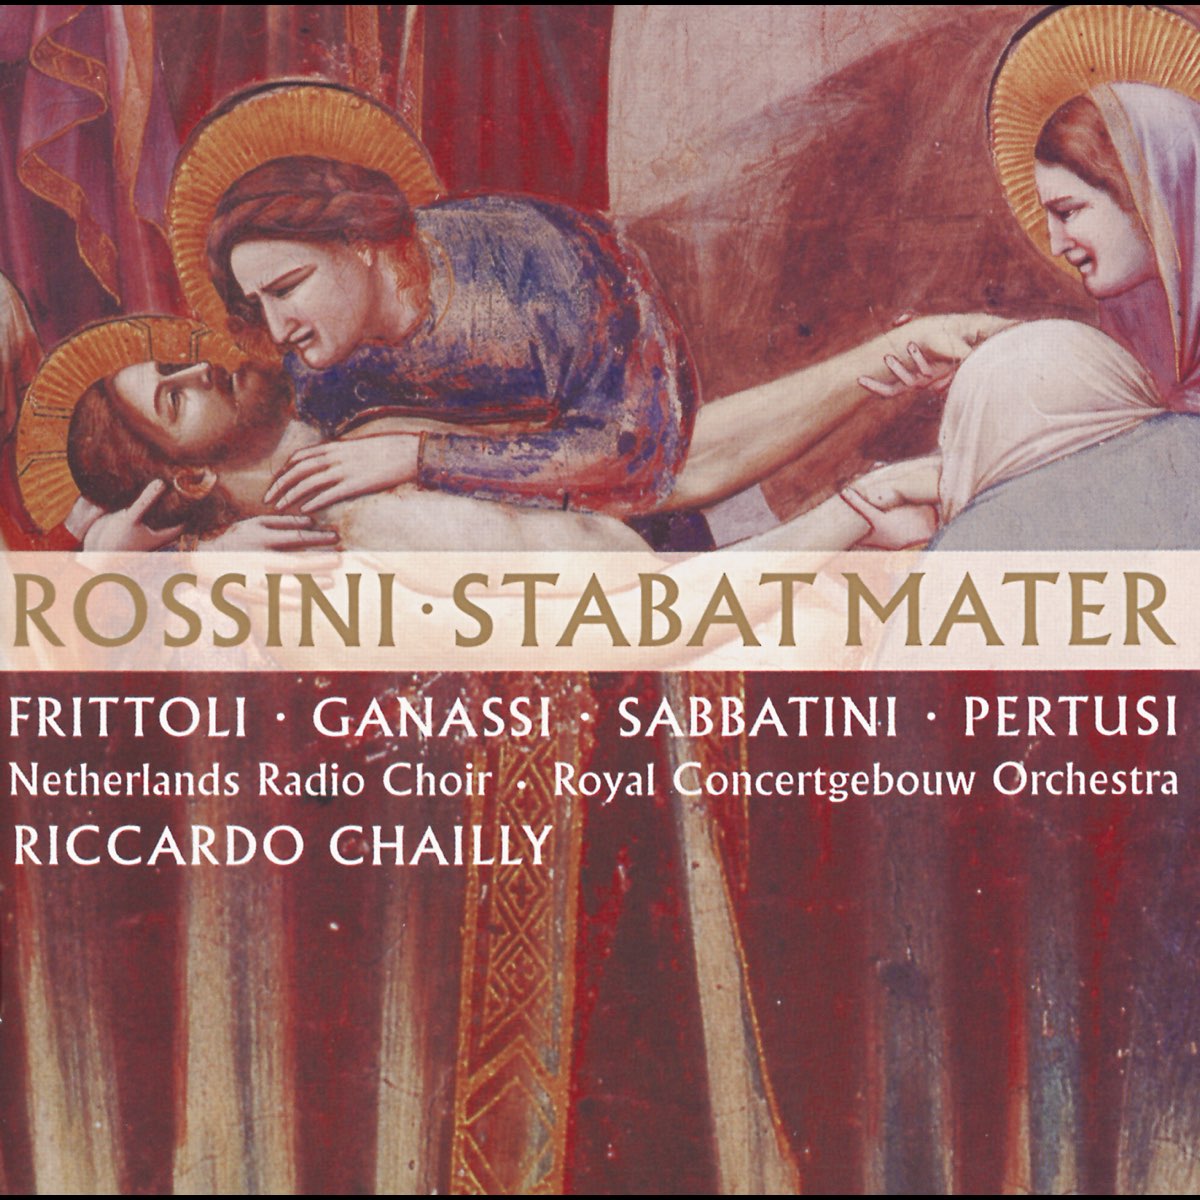 Keel Natuur nek Rossini: Stabat Mater by Royal Concertgebouw Orchestra & Riccardo Chailly  on Apple Music